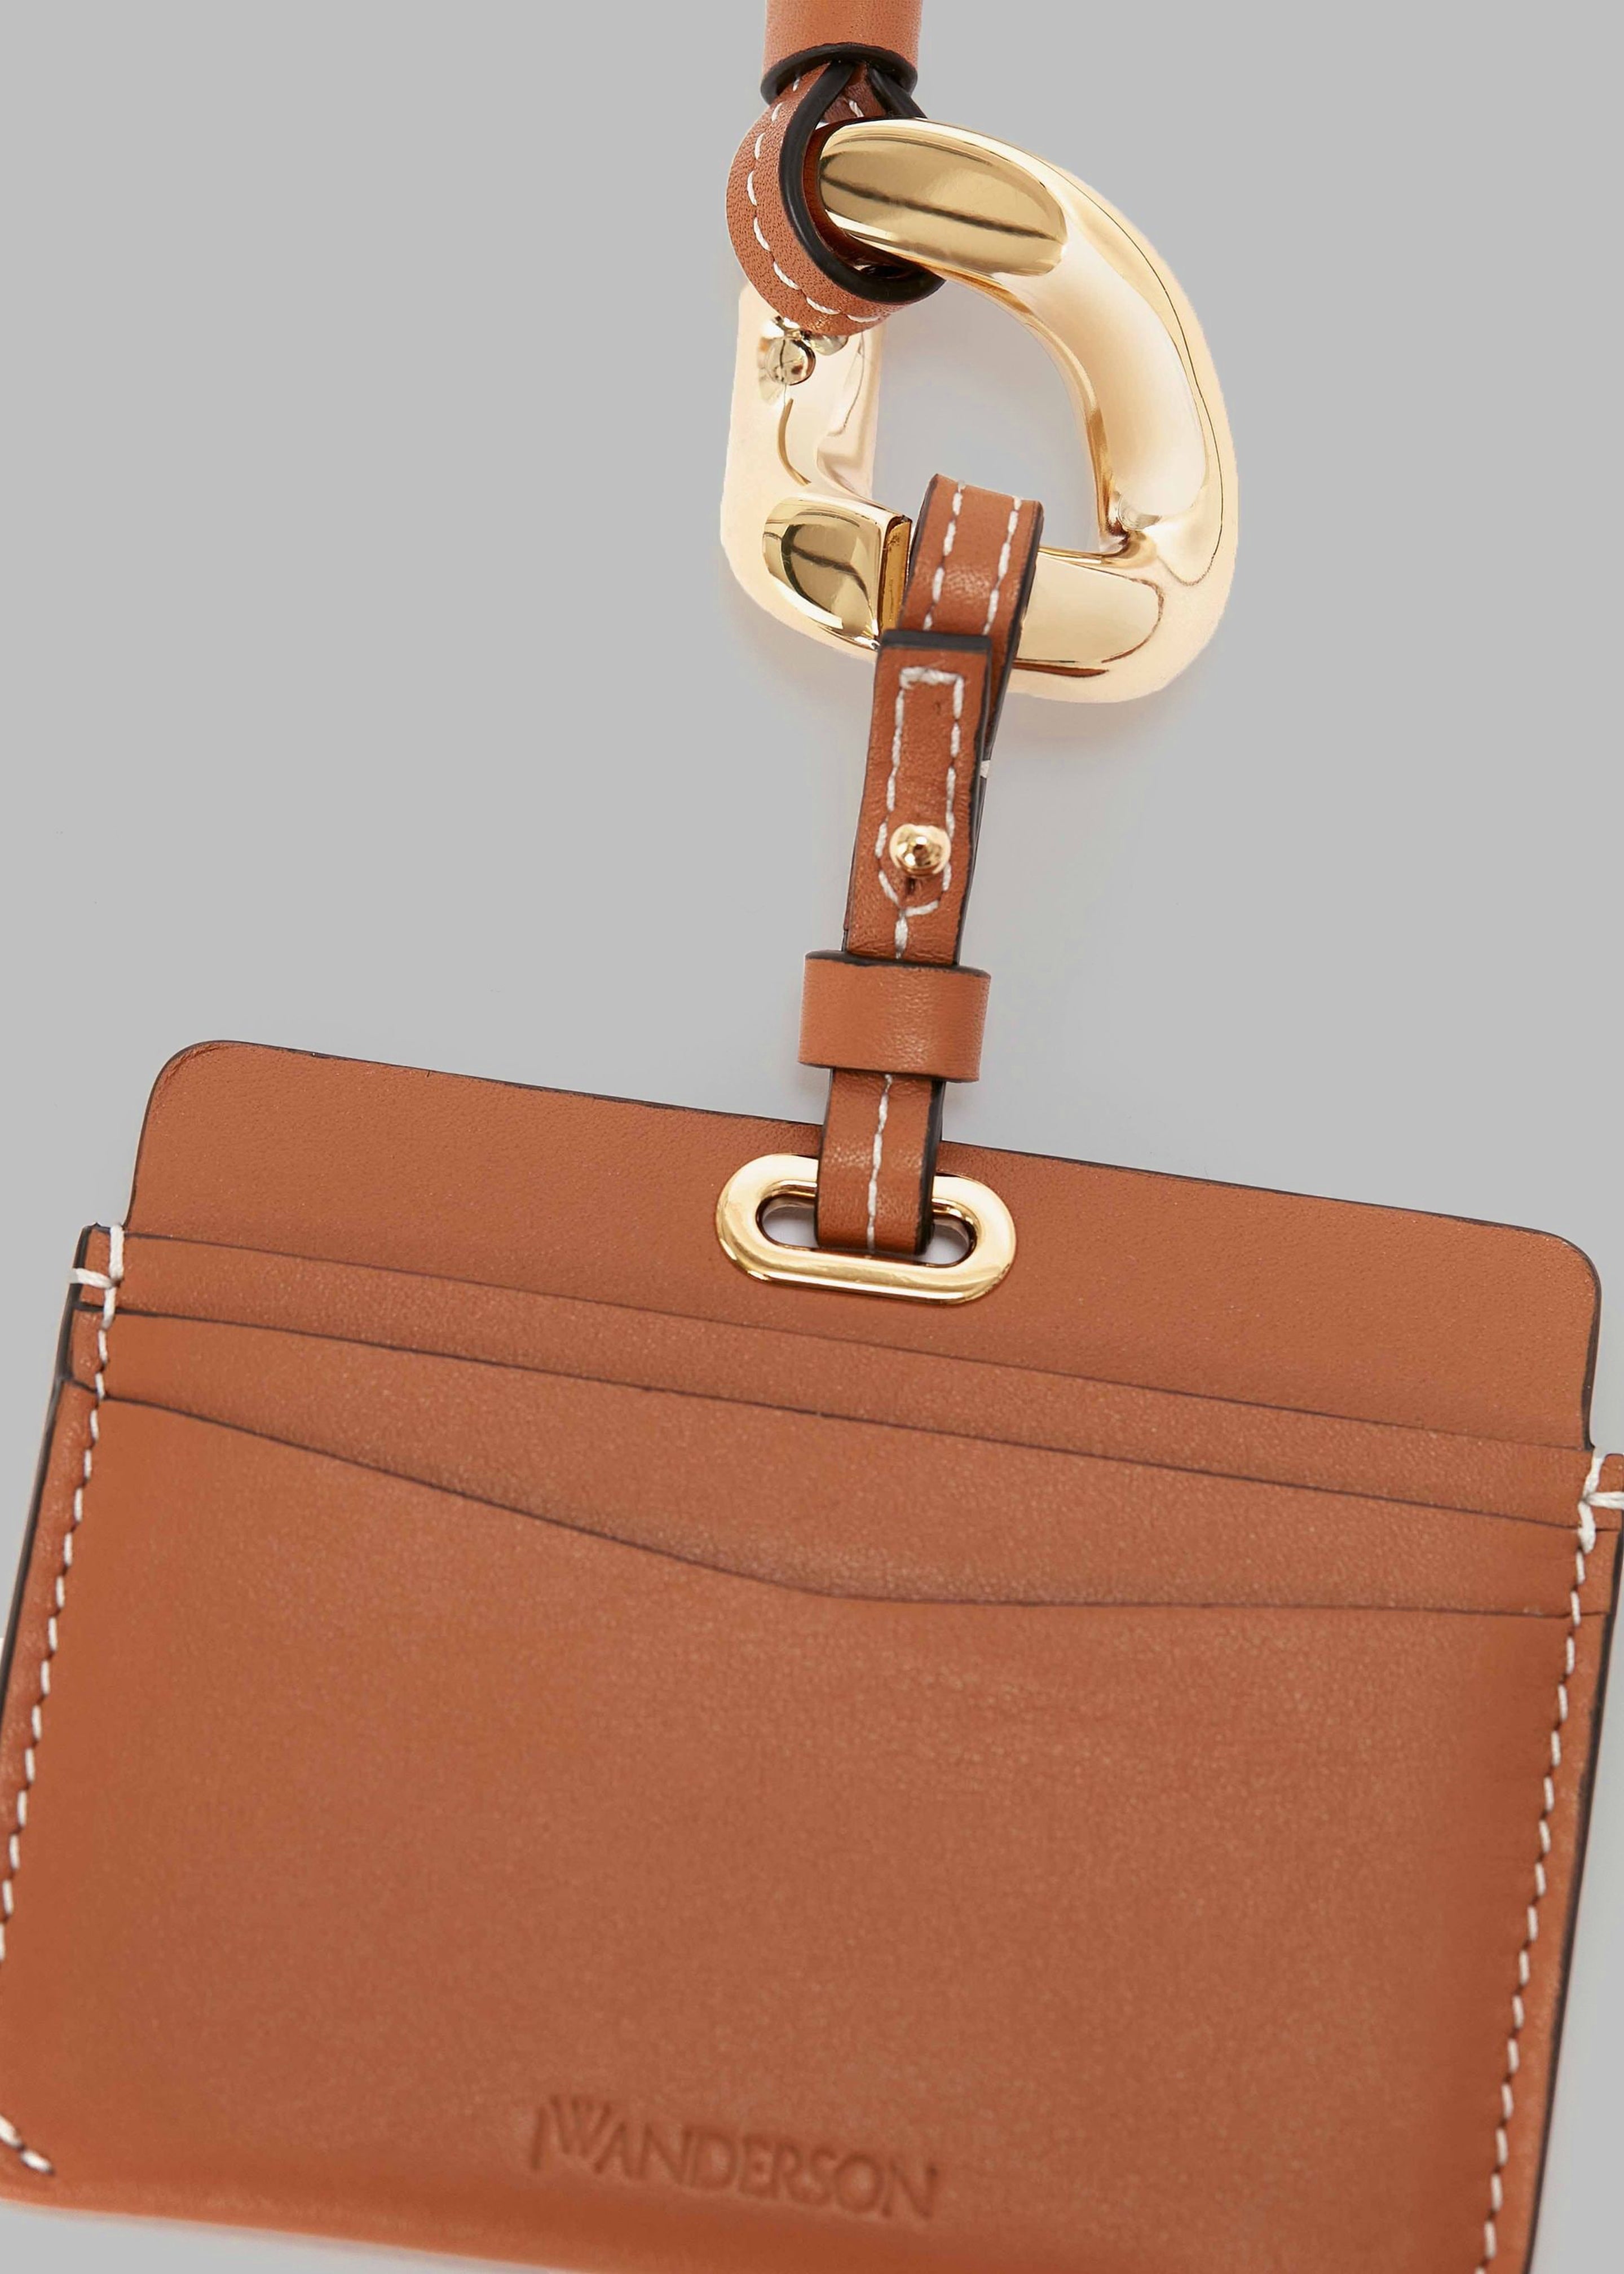 JW Anderson Cardholder with Chain Link Strap - Pecan - 2